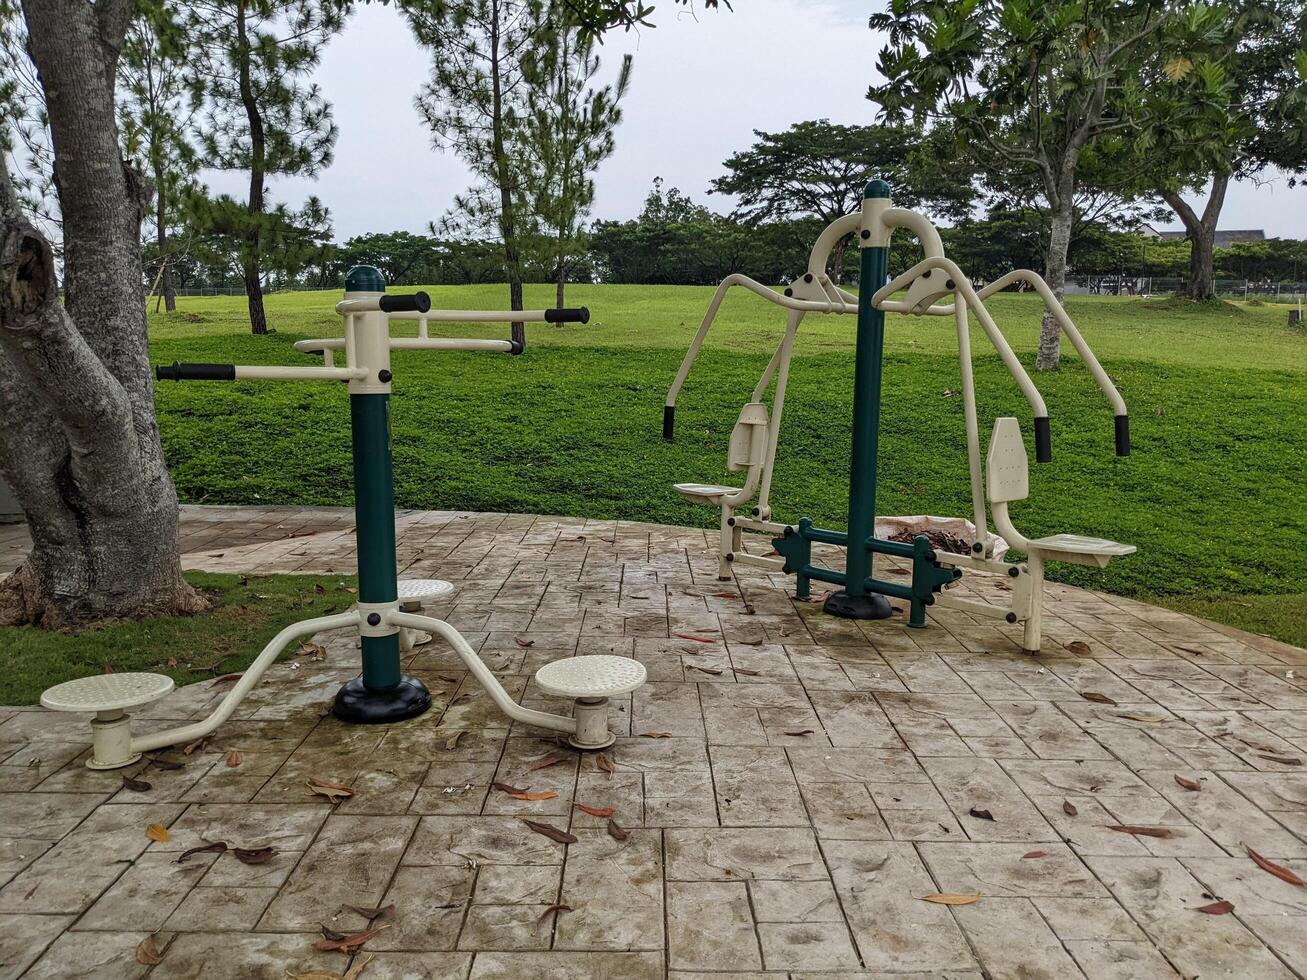 Workout arena on the green park. The photo is suitable to use for hobbies activity, leisure activity and park background.